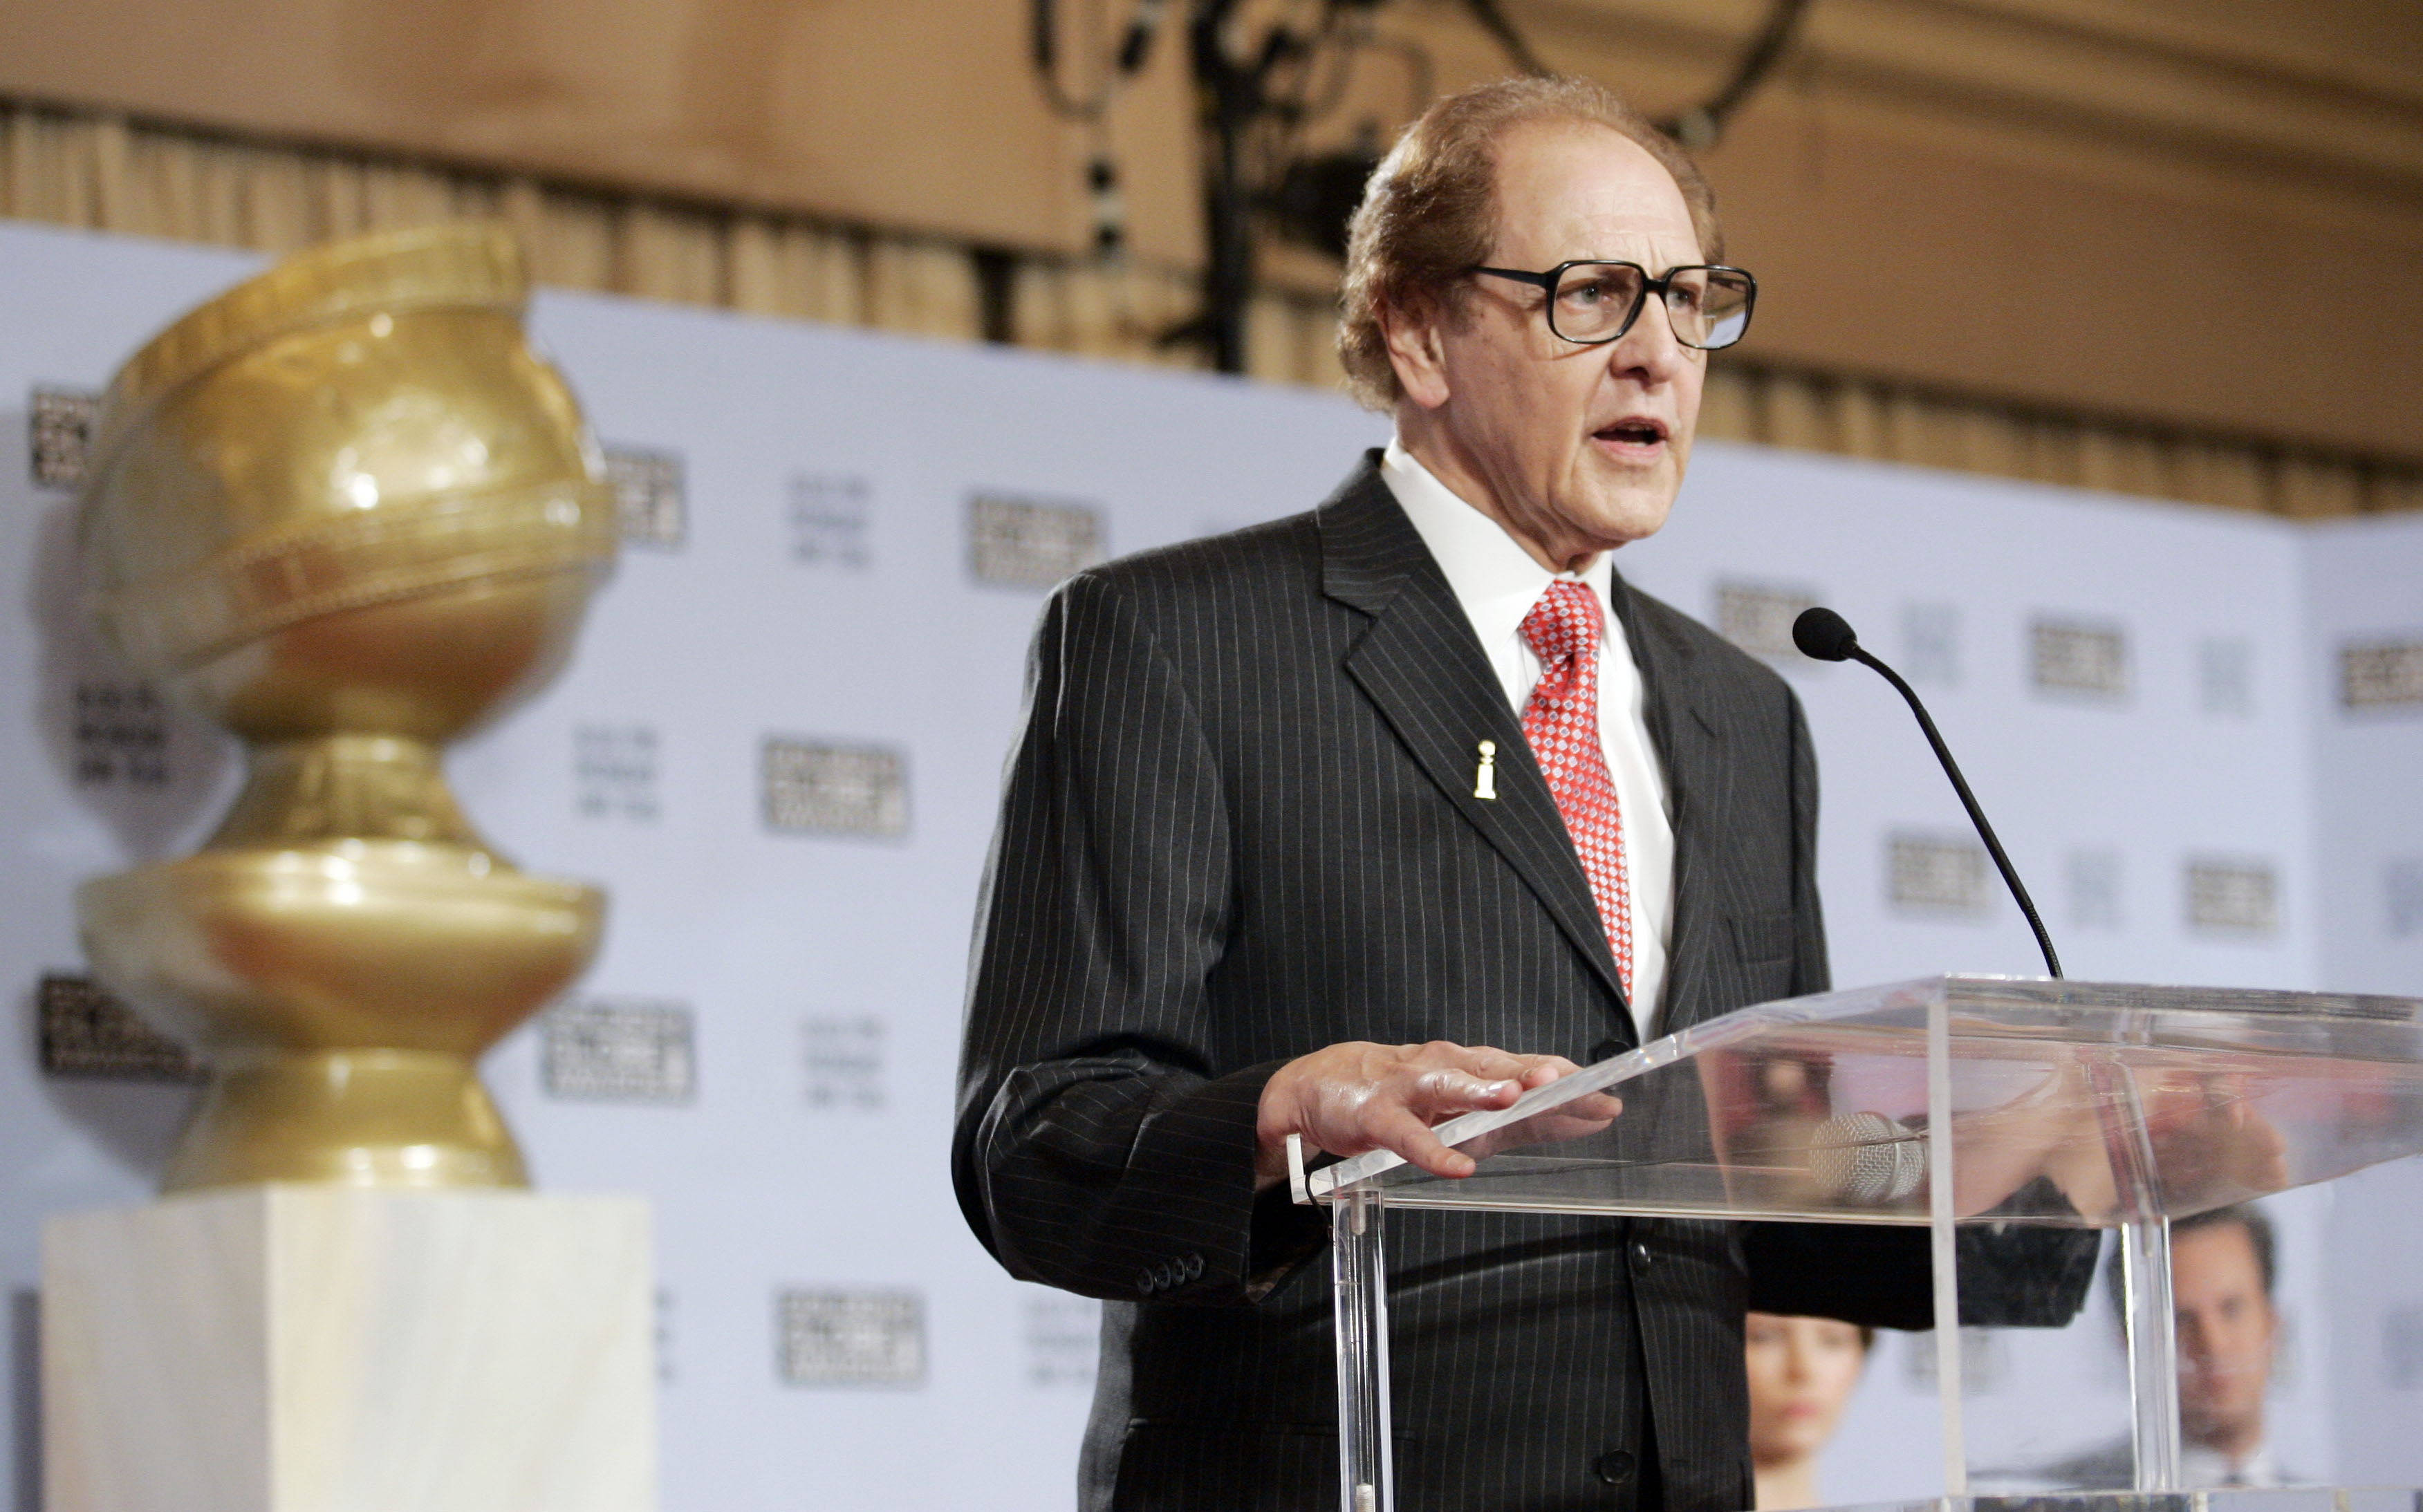 Philip Berk, president of the Hollywood Foreign Press Association, speaks before the nominees for the Golden Globe Awards are announced at the Beverly Hilton in Beverly Hills, California, December 14, 2006. (Bloomberg—Bloomberg via Getty Images)